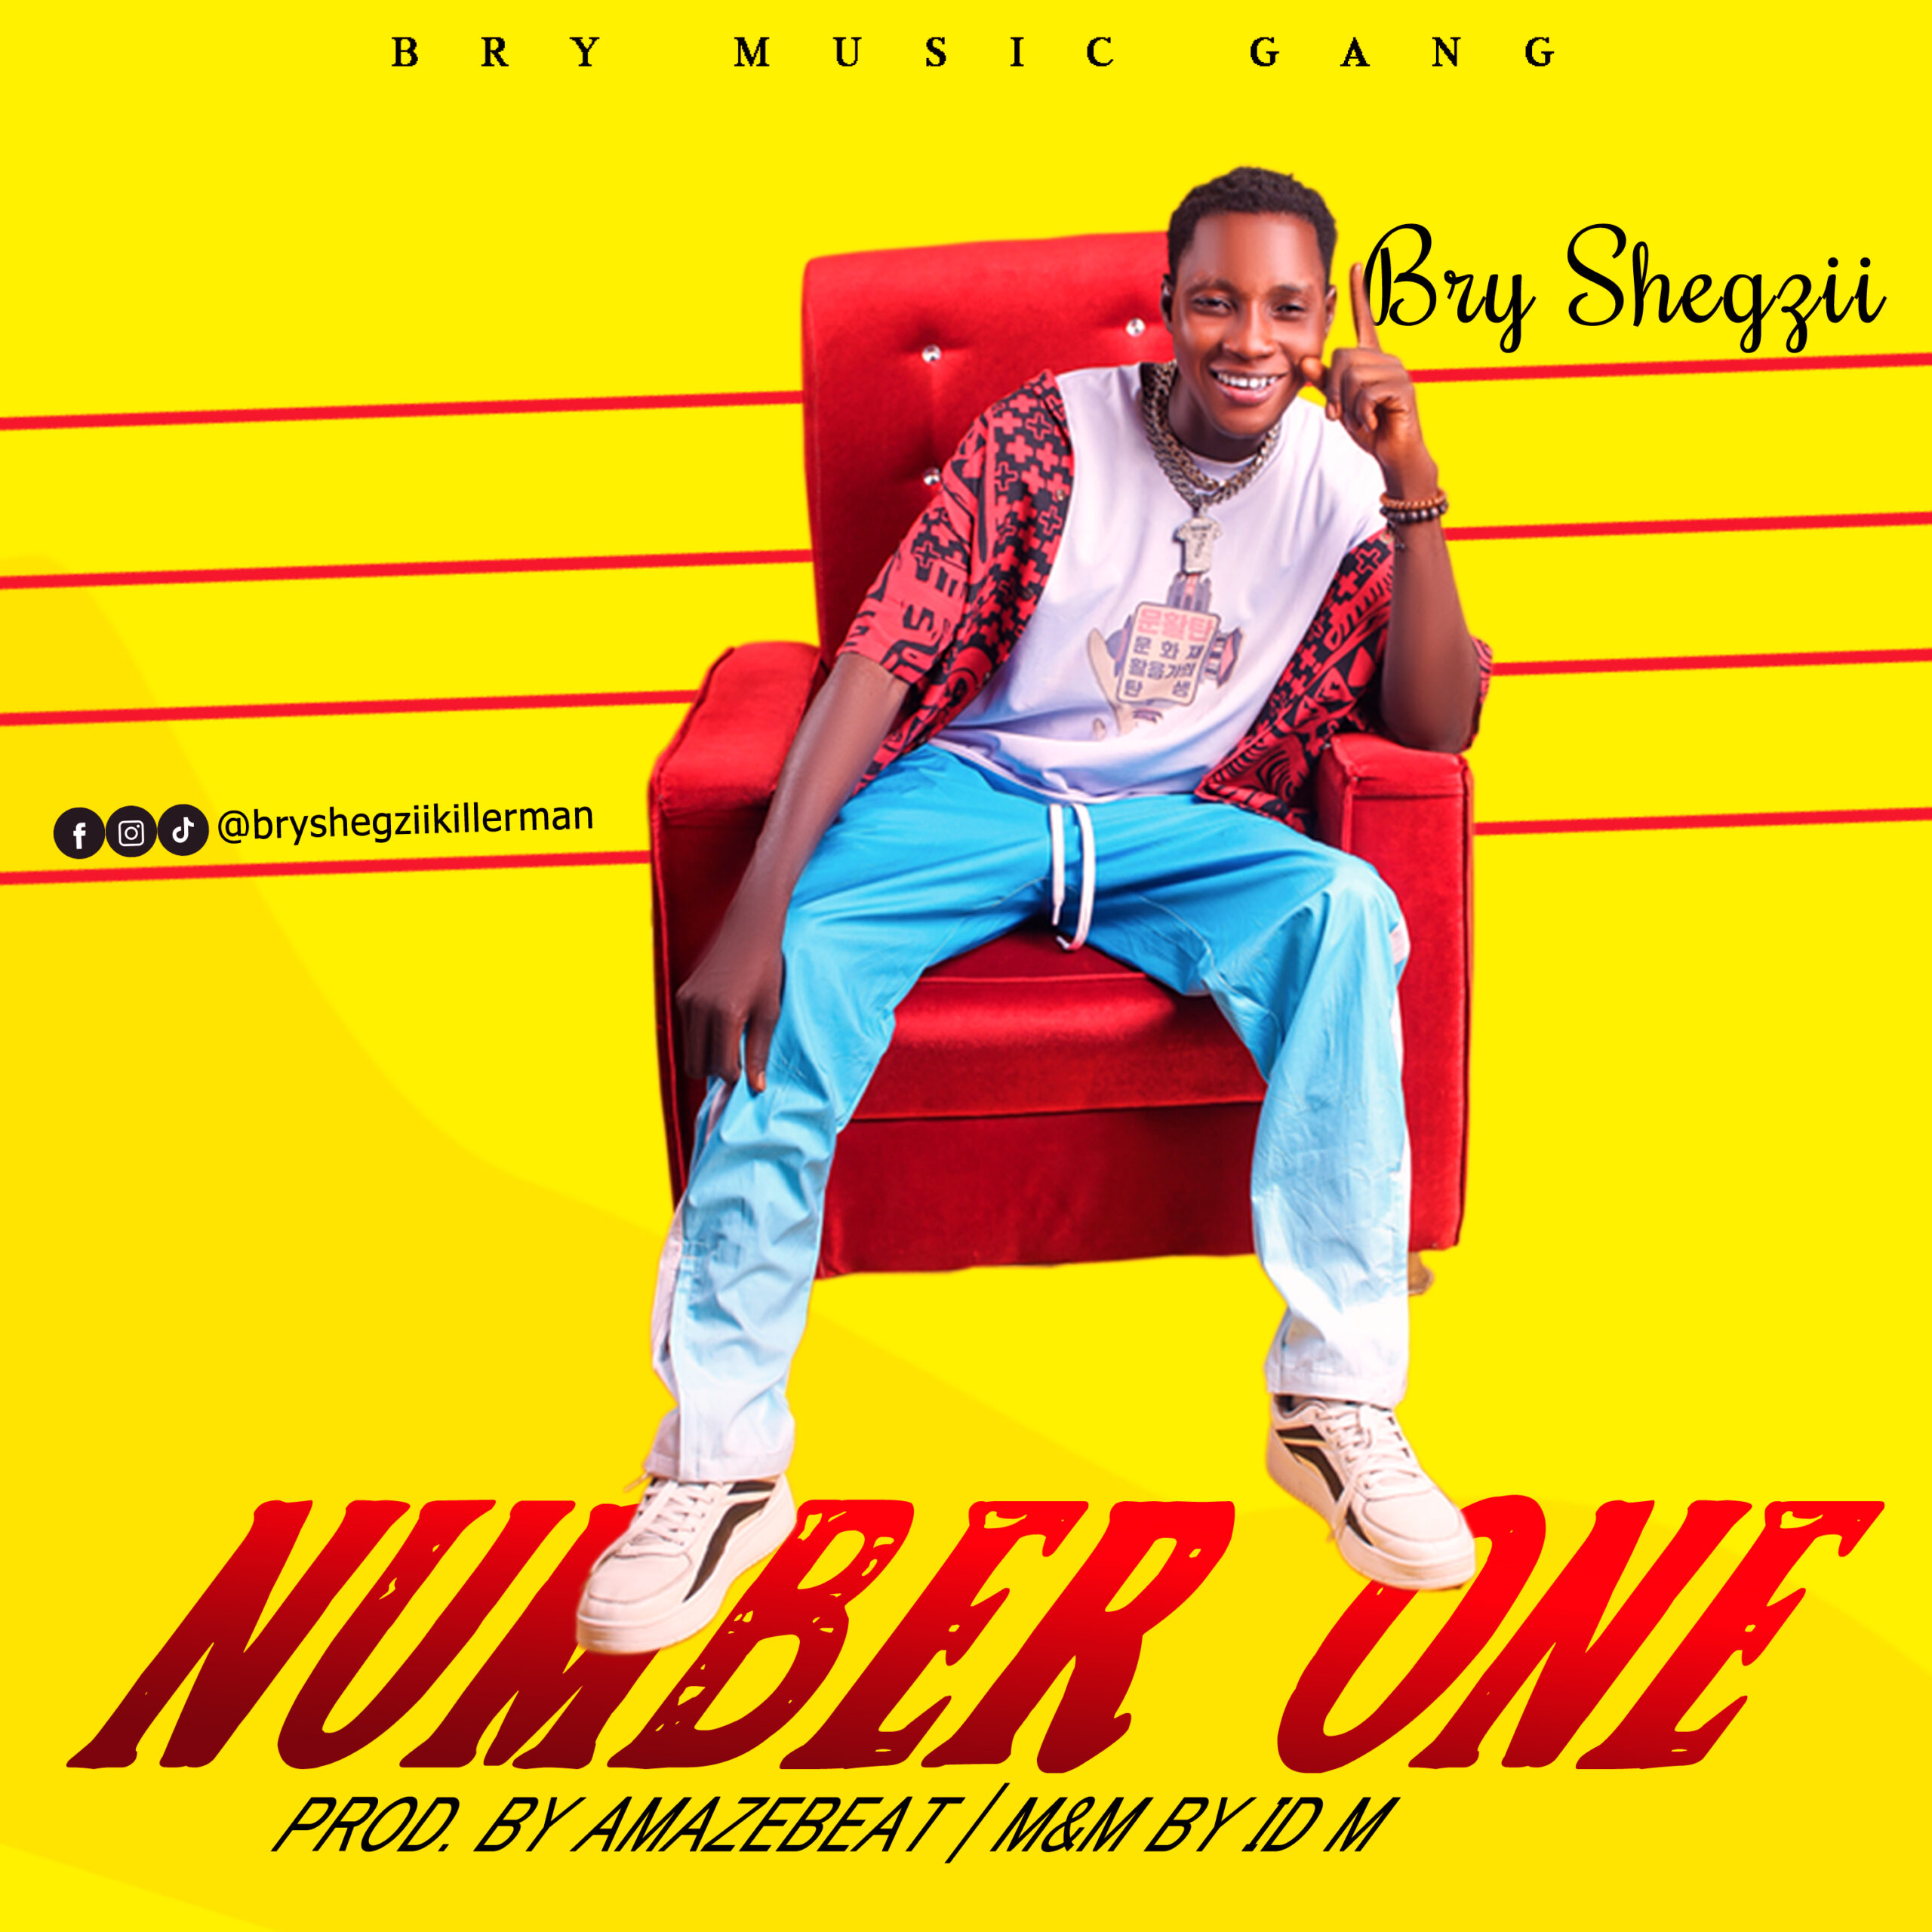 DOWNLOAD MUSIC: Bry Shegzii – Number One